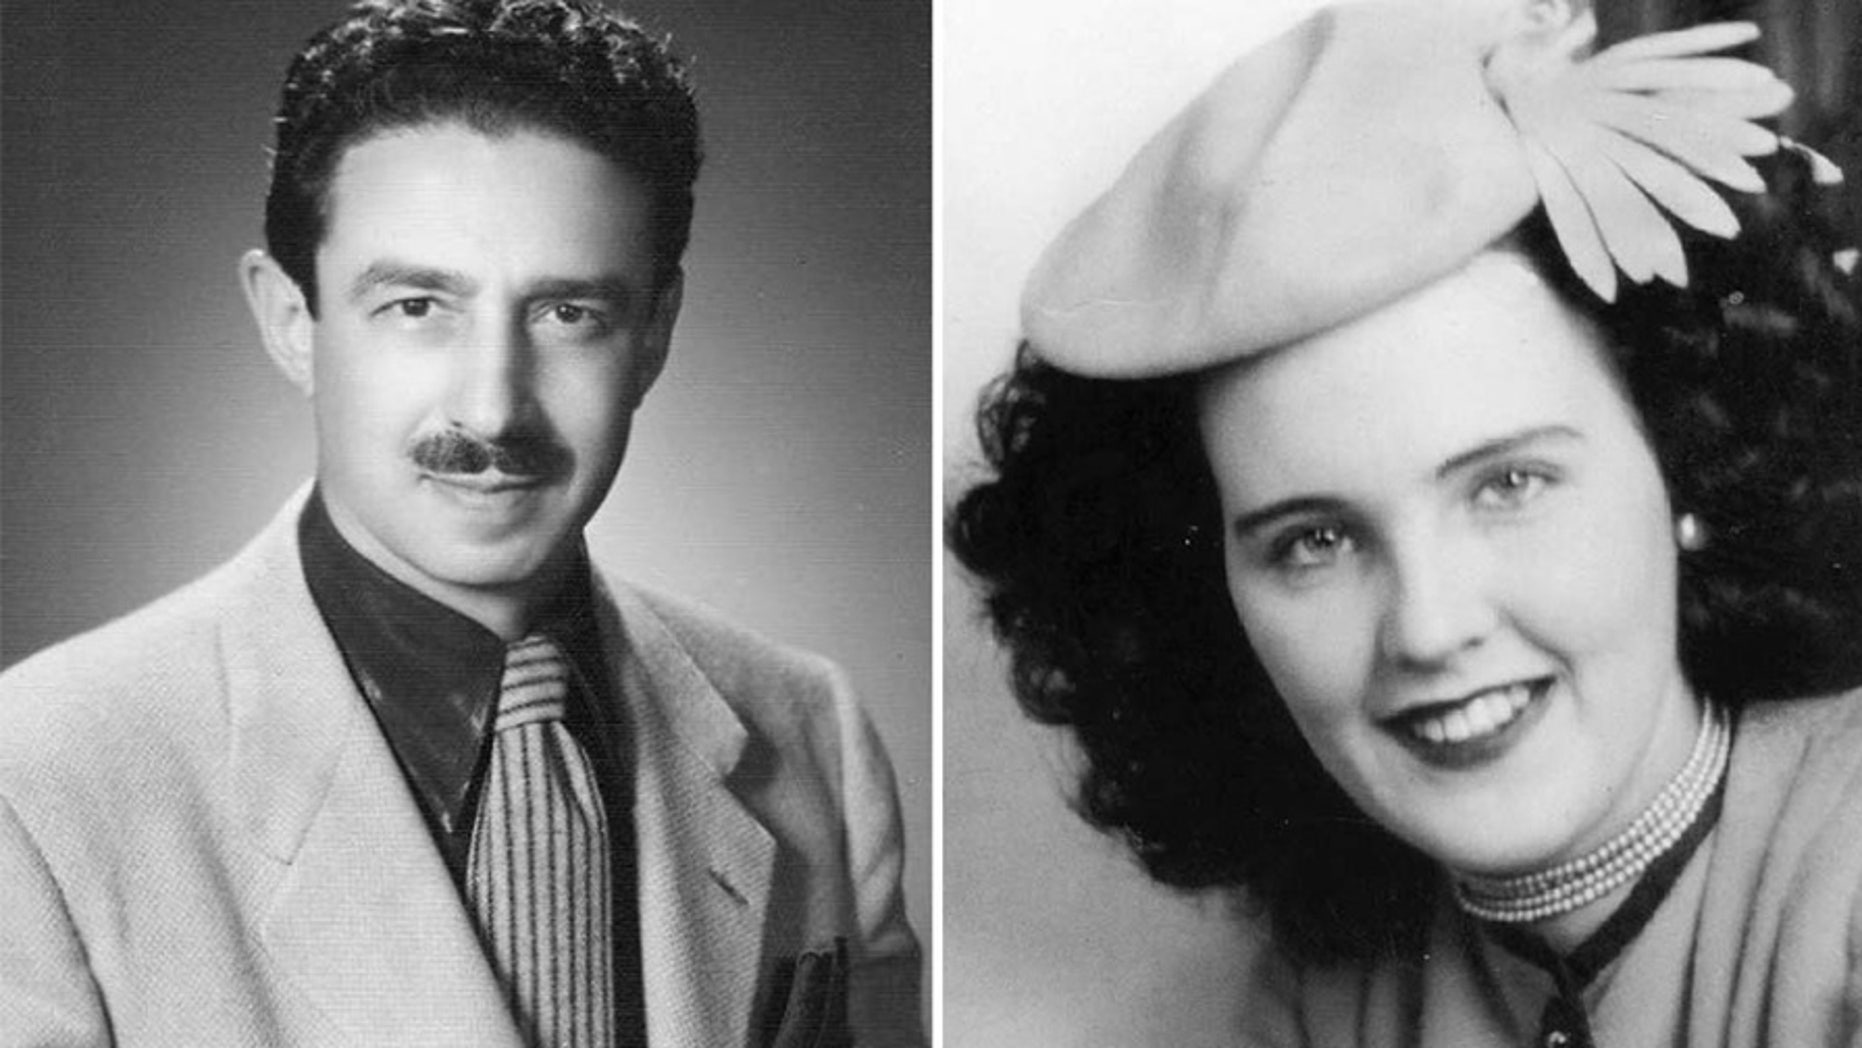 Retired LAPD detective who thinks his father killed the Black Dahlia says he still loves him